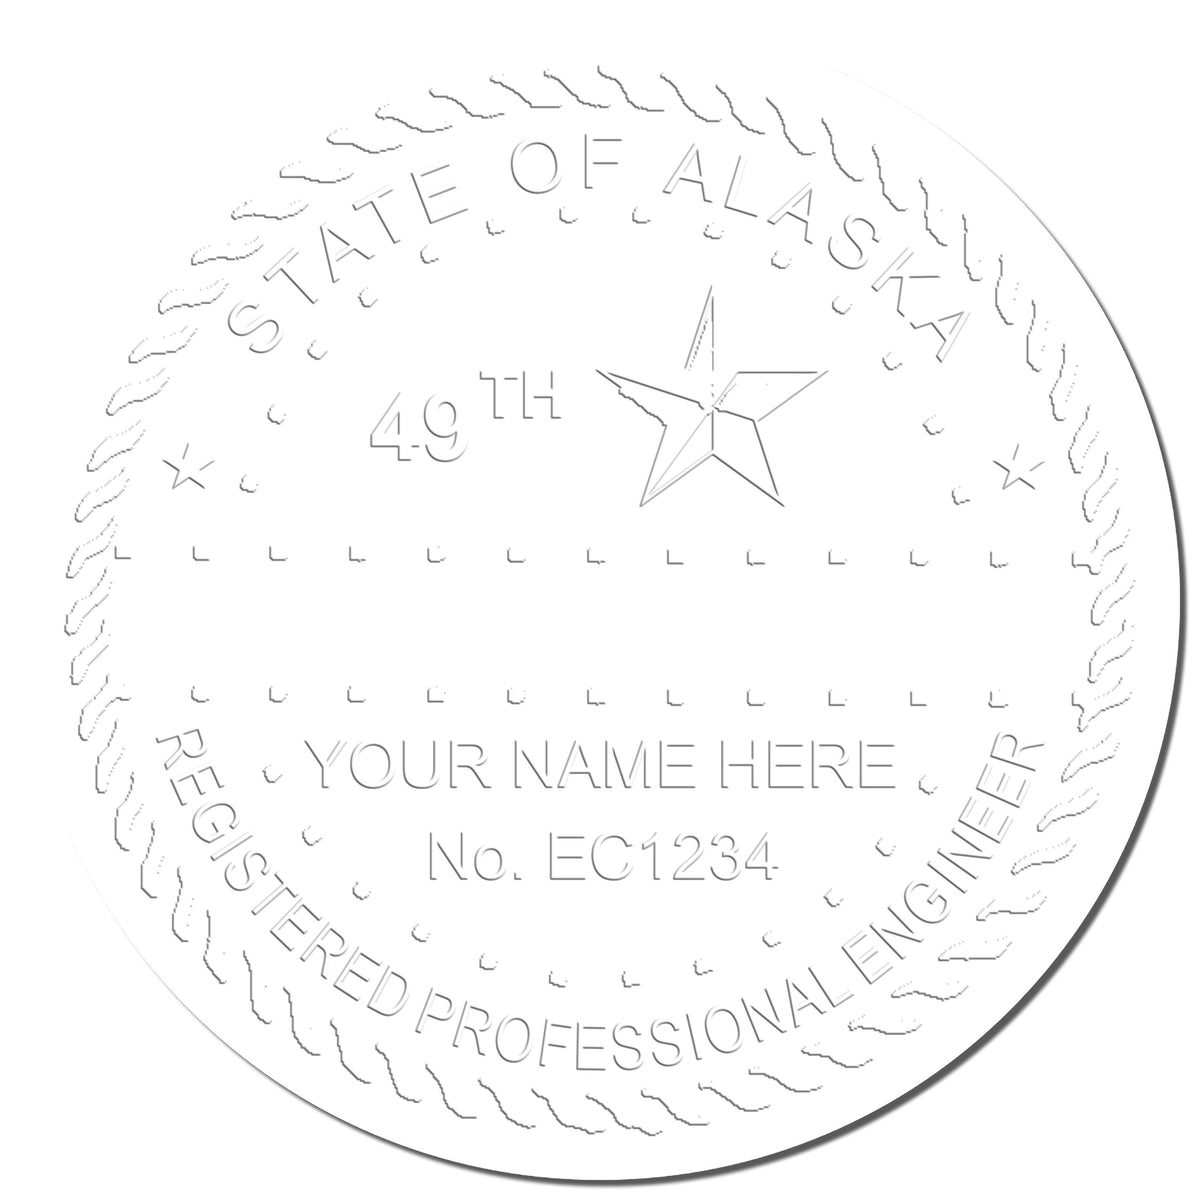 This paper is stamped with a sample imprint of the State of Alaska Extended Long Reach Engineer Seal, signifying its quality and reliability.